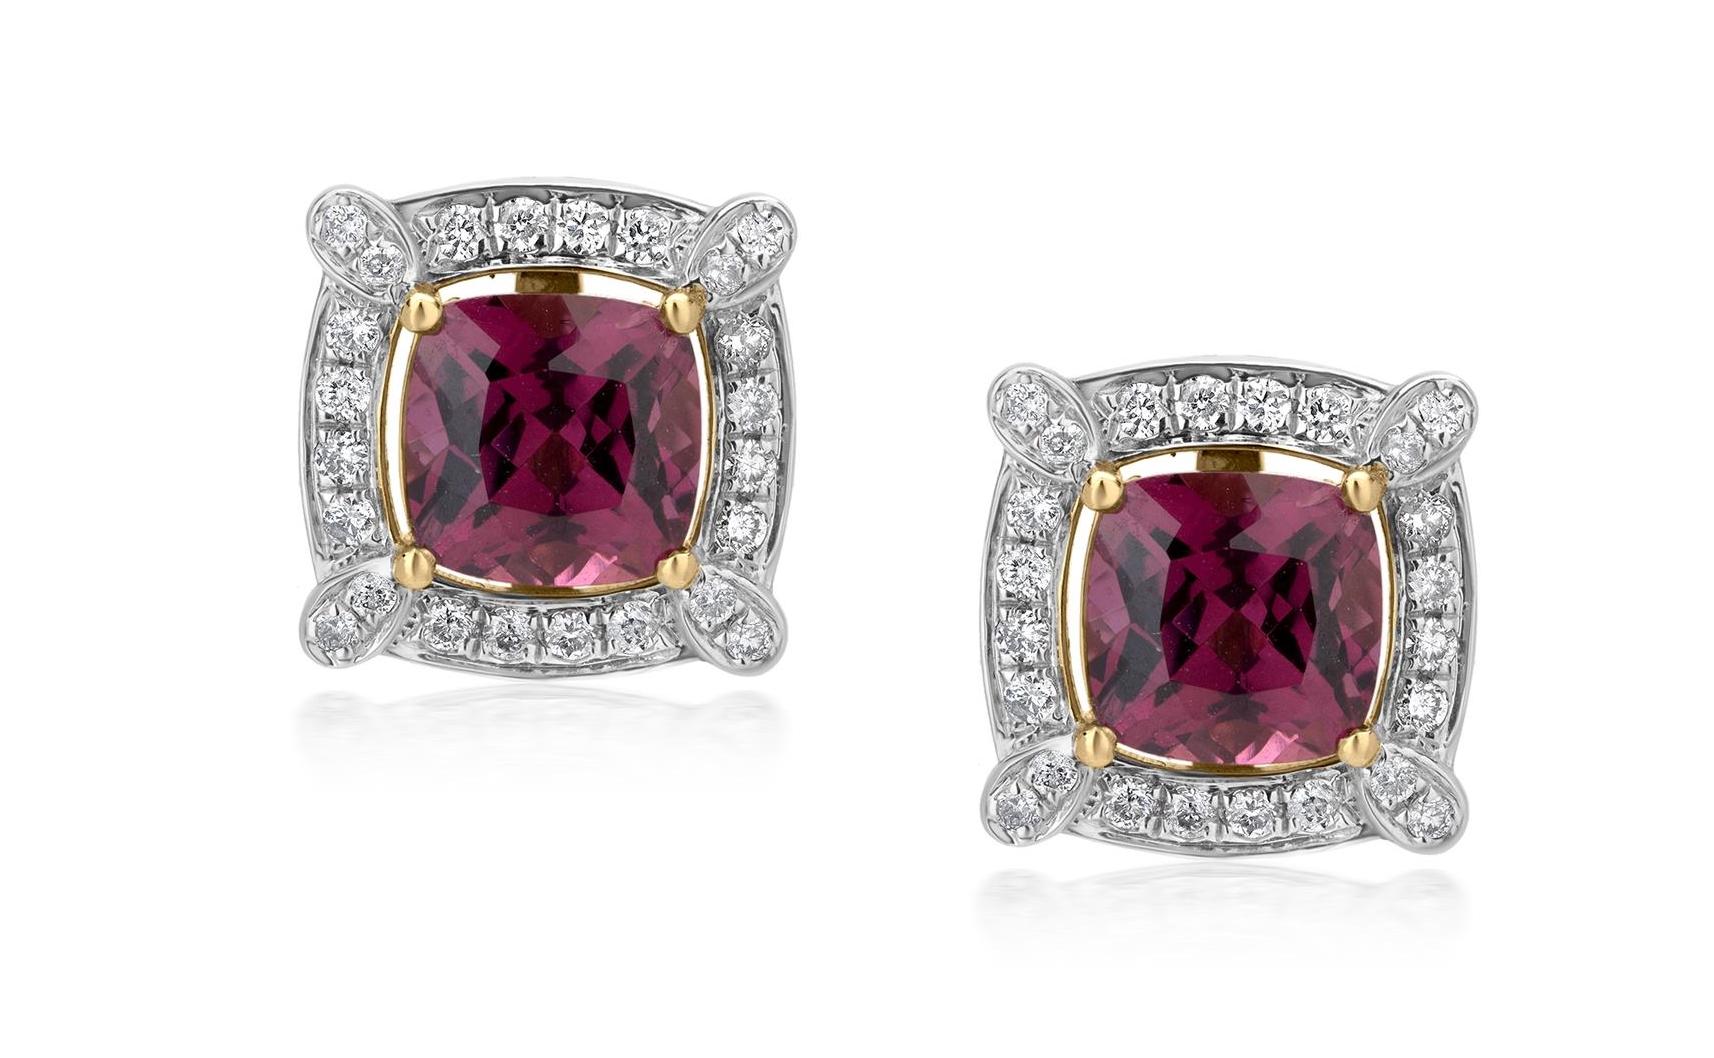 This charming pair of Gemistry diamond halo stud earrings are made of 14K yellow and white gold. The garnet stud earrings are elegantly decorated with 48 precious Round Full Cut Diamond in a Micro Pave setting. The diamonds are GH in color and